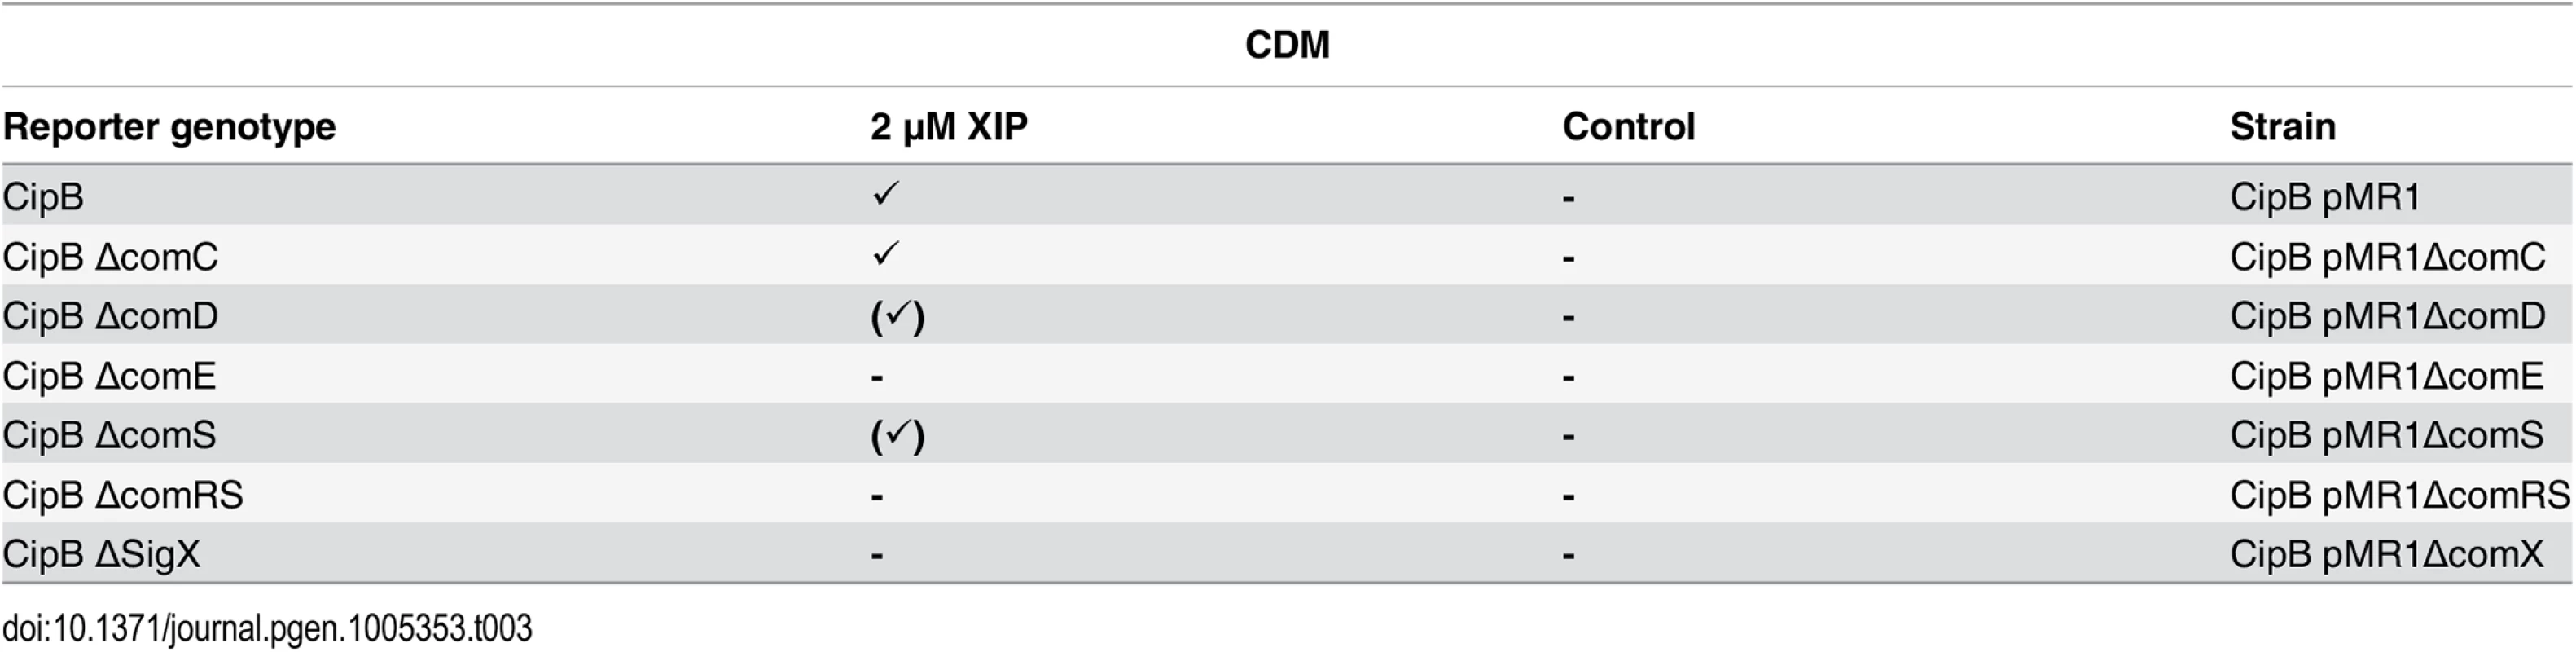 Expression of <i>cipB</i> in different gene deletion background in CDM under XIP induced conditions.